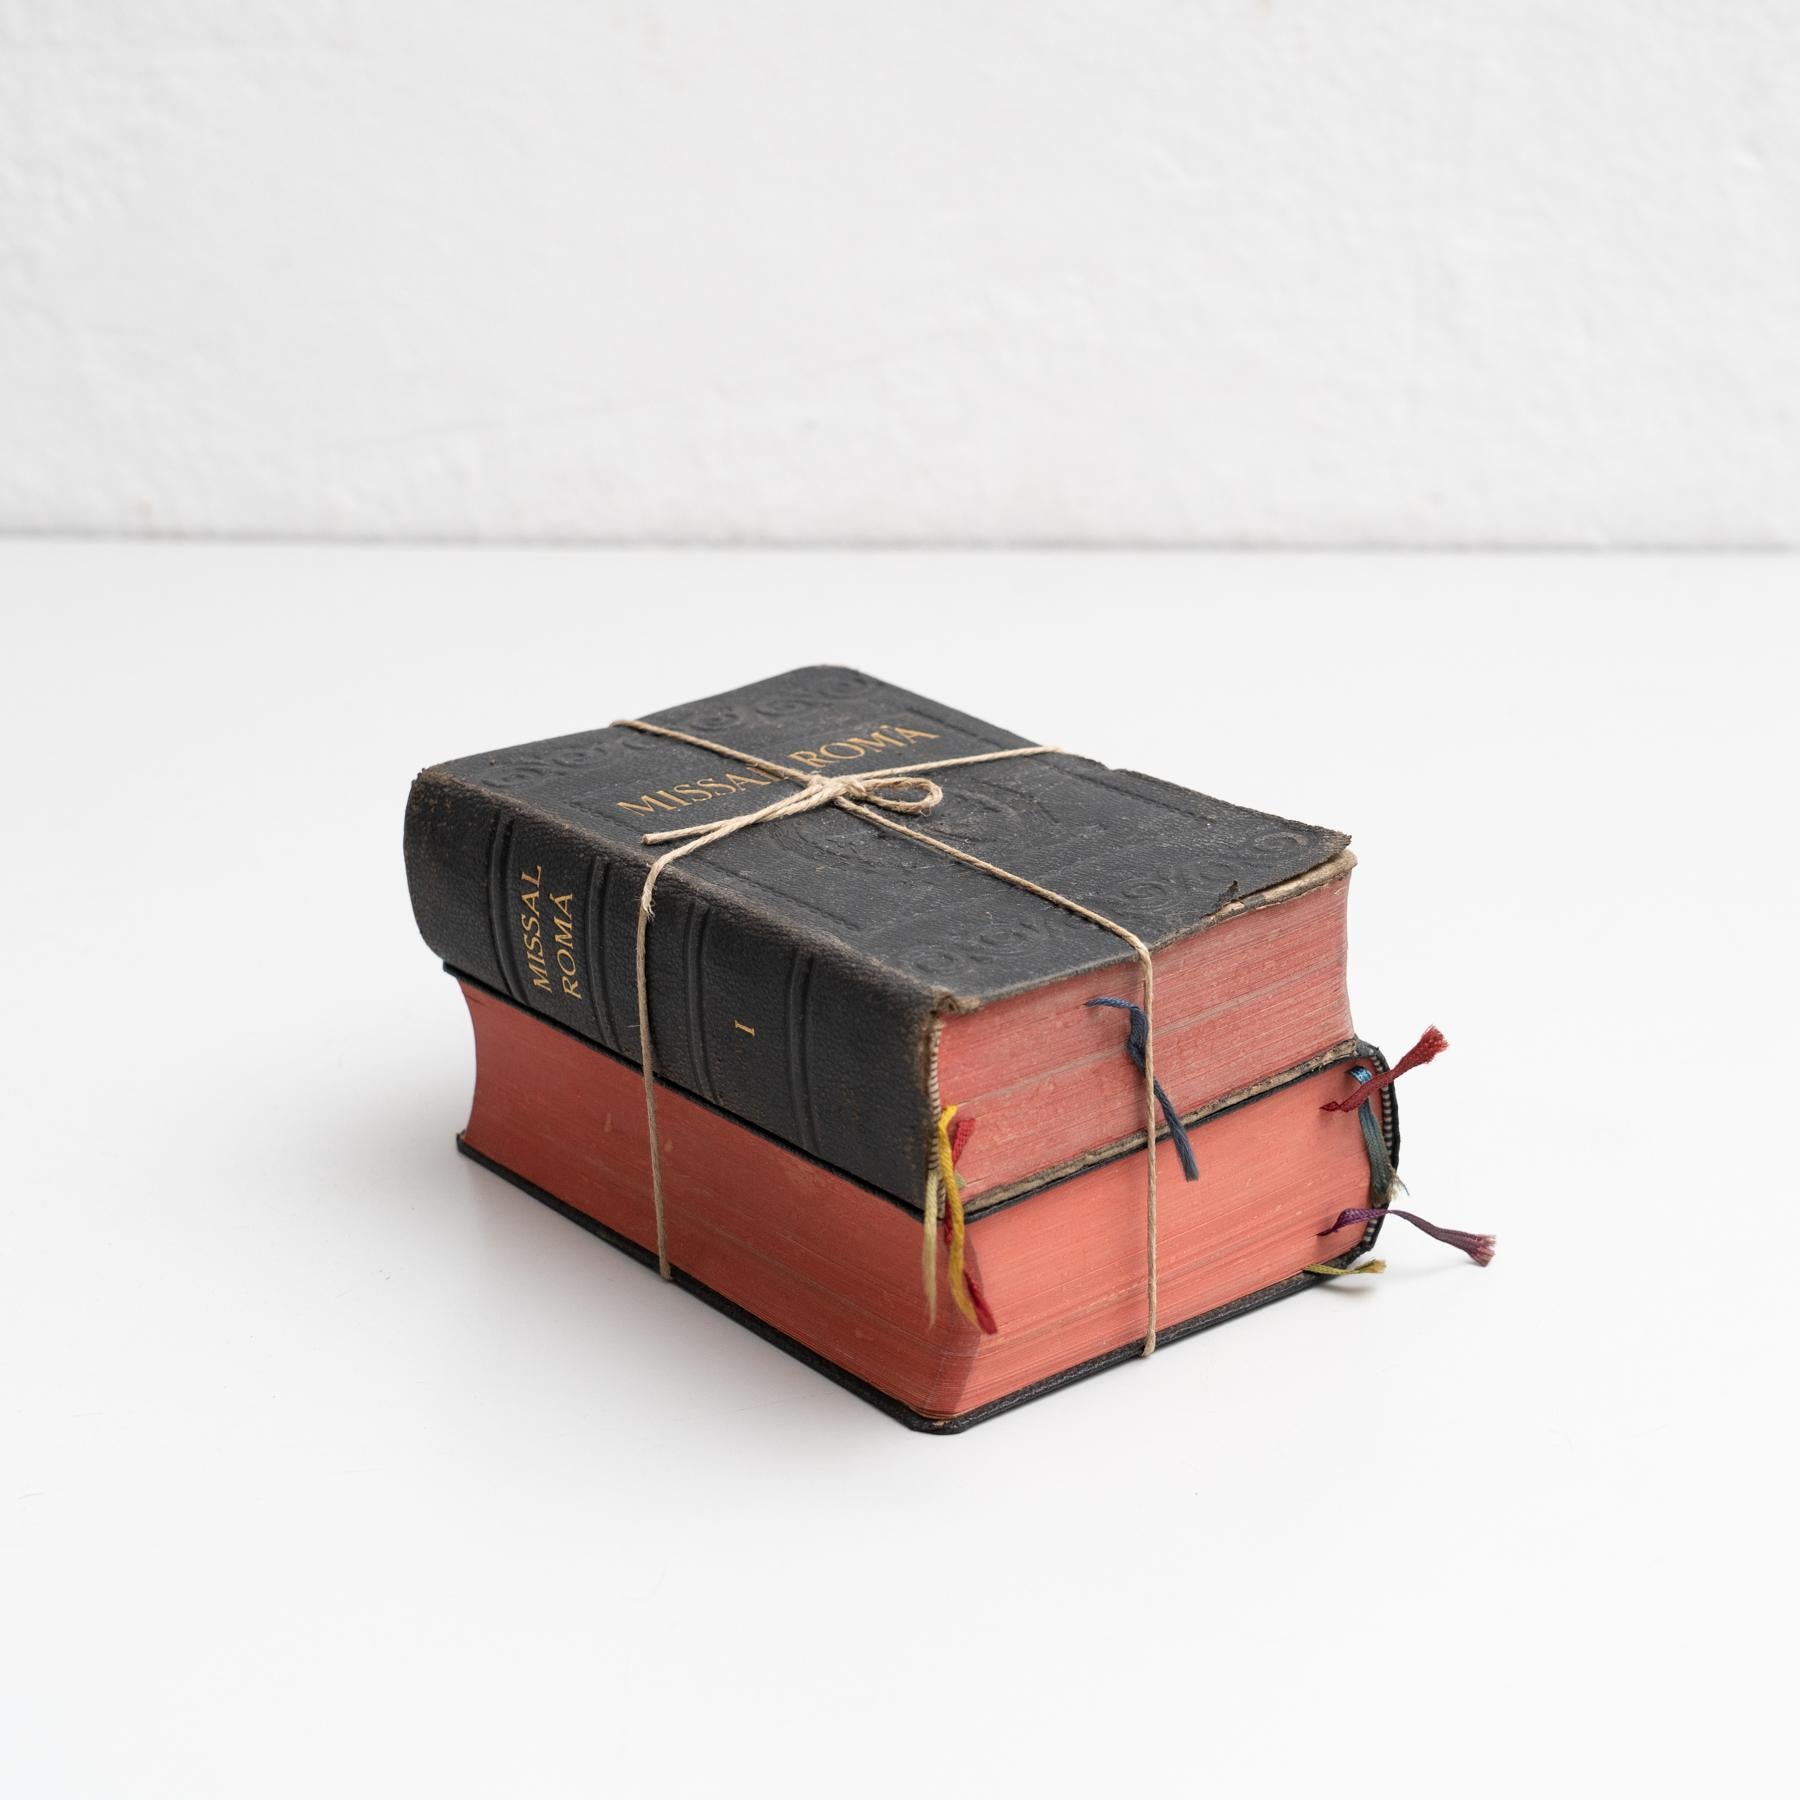 Antique religious book artwork consisting of two books tied together by a thread.

Two volumes of the Roman Missal published in Catalan by an Unknown editor.

In original condition, with minor wear consistent with age and use, preserving a